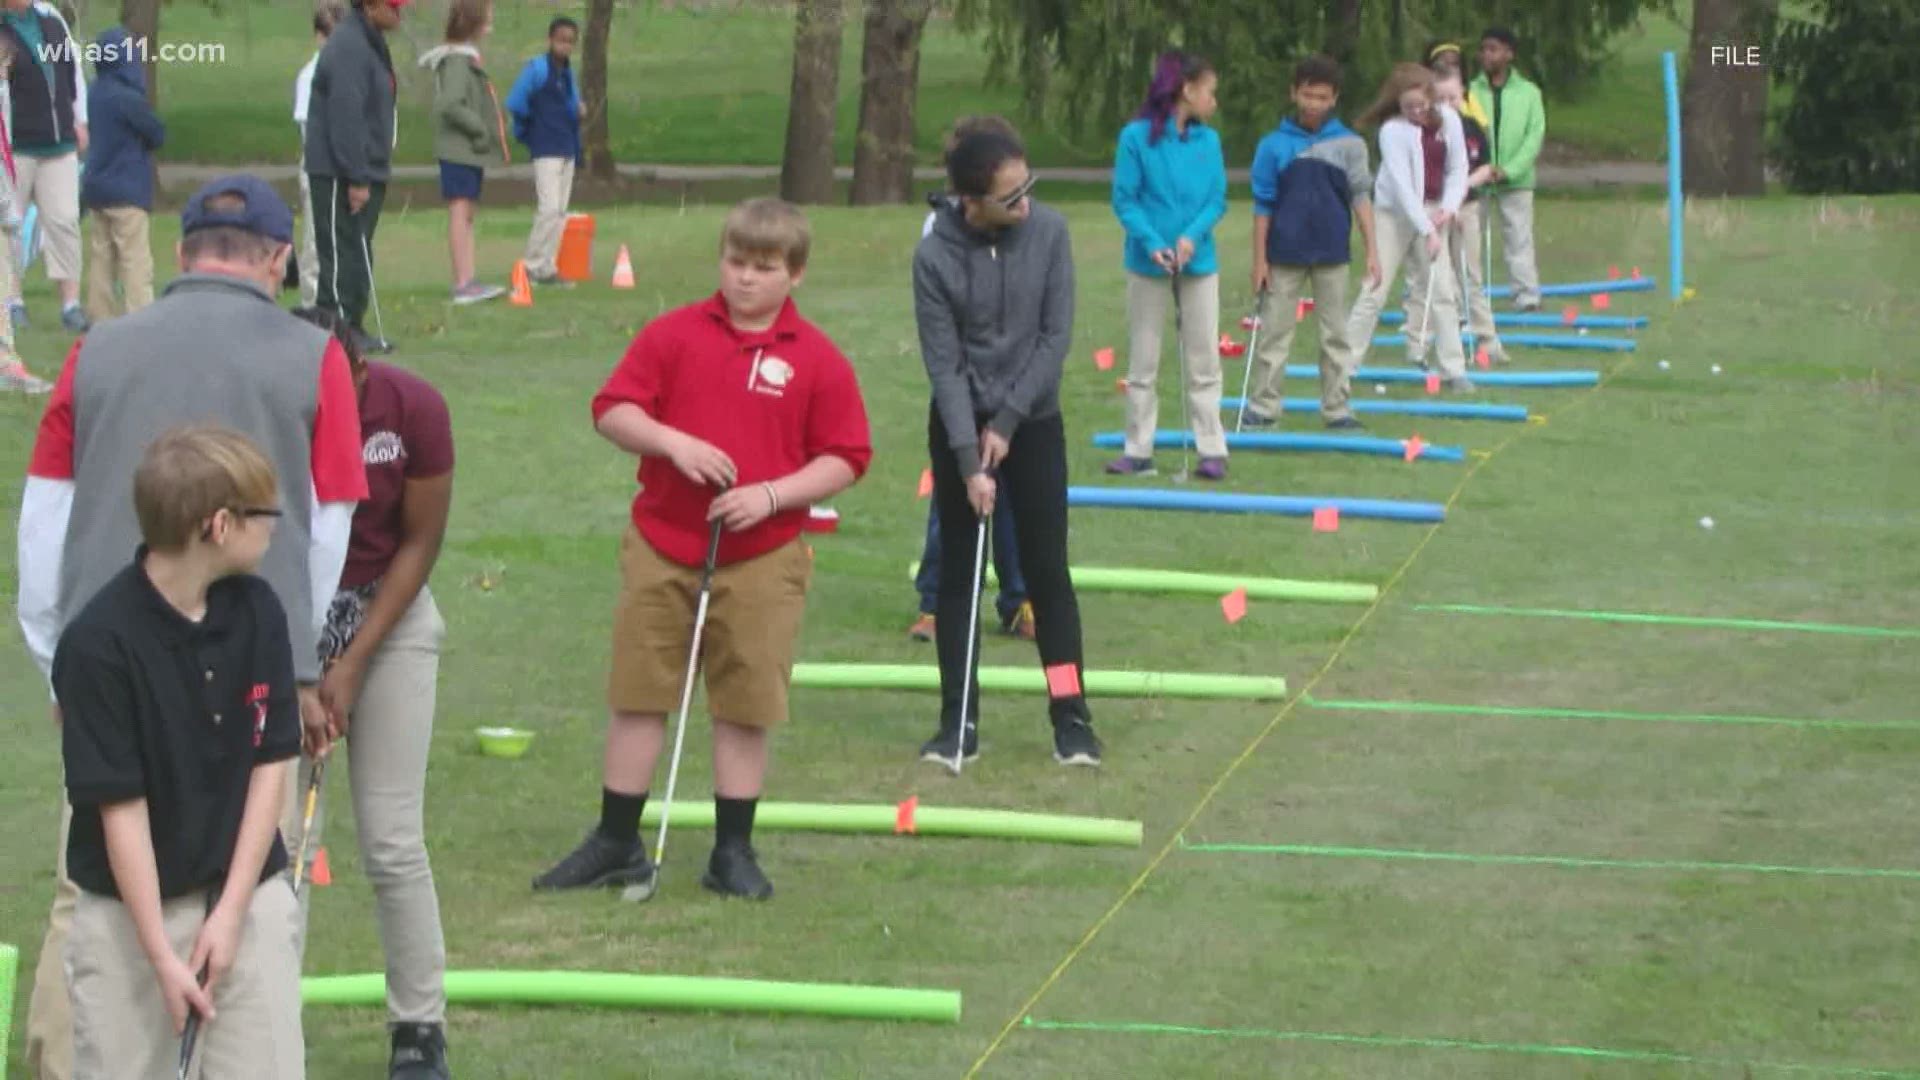 The organization helps teach kids both golf and life skills while getting them outdoors and socializing with their peers.